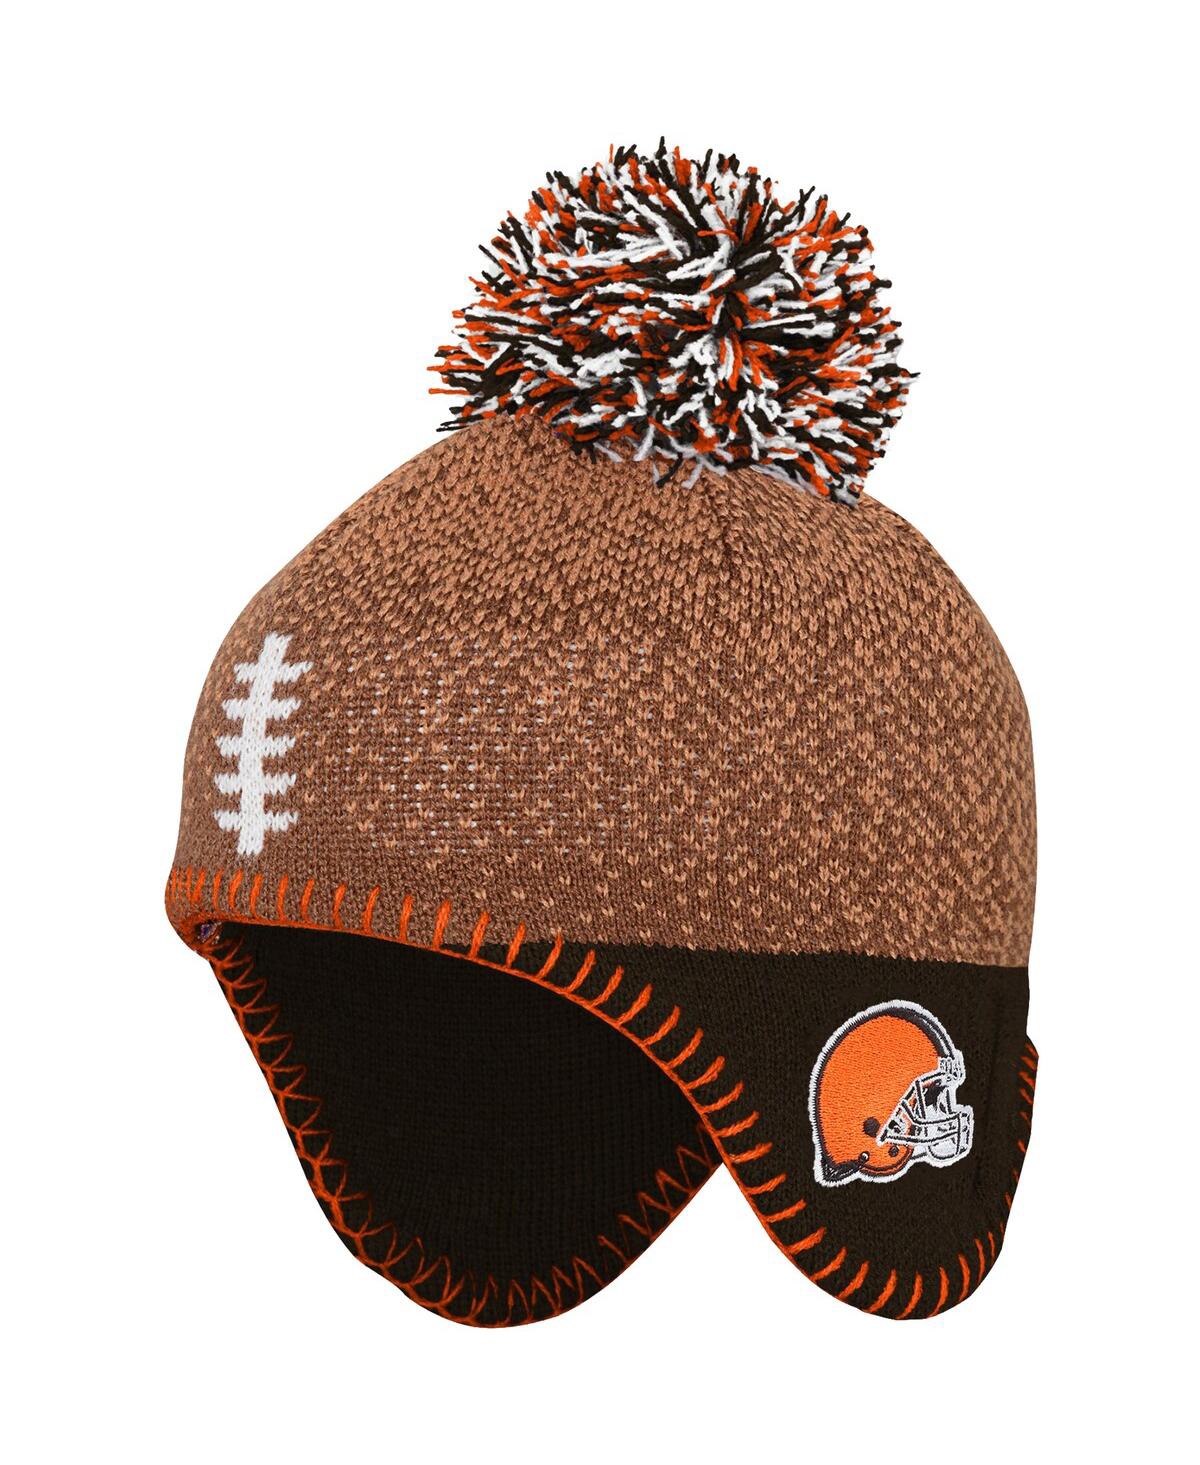 Outerstuff Babies' Preschool Boys And Girls Brown Cleveland Browns Football Head Knit Hat With Pom